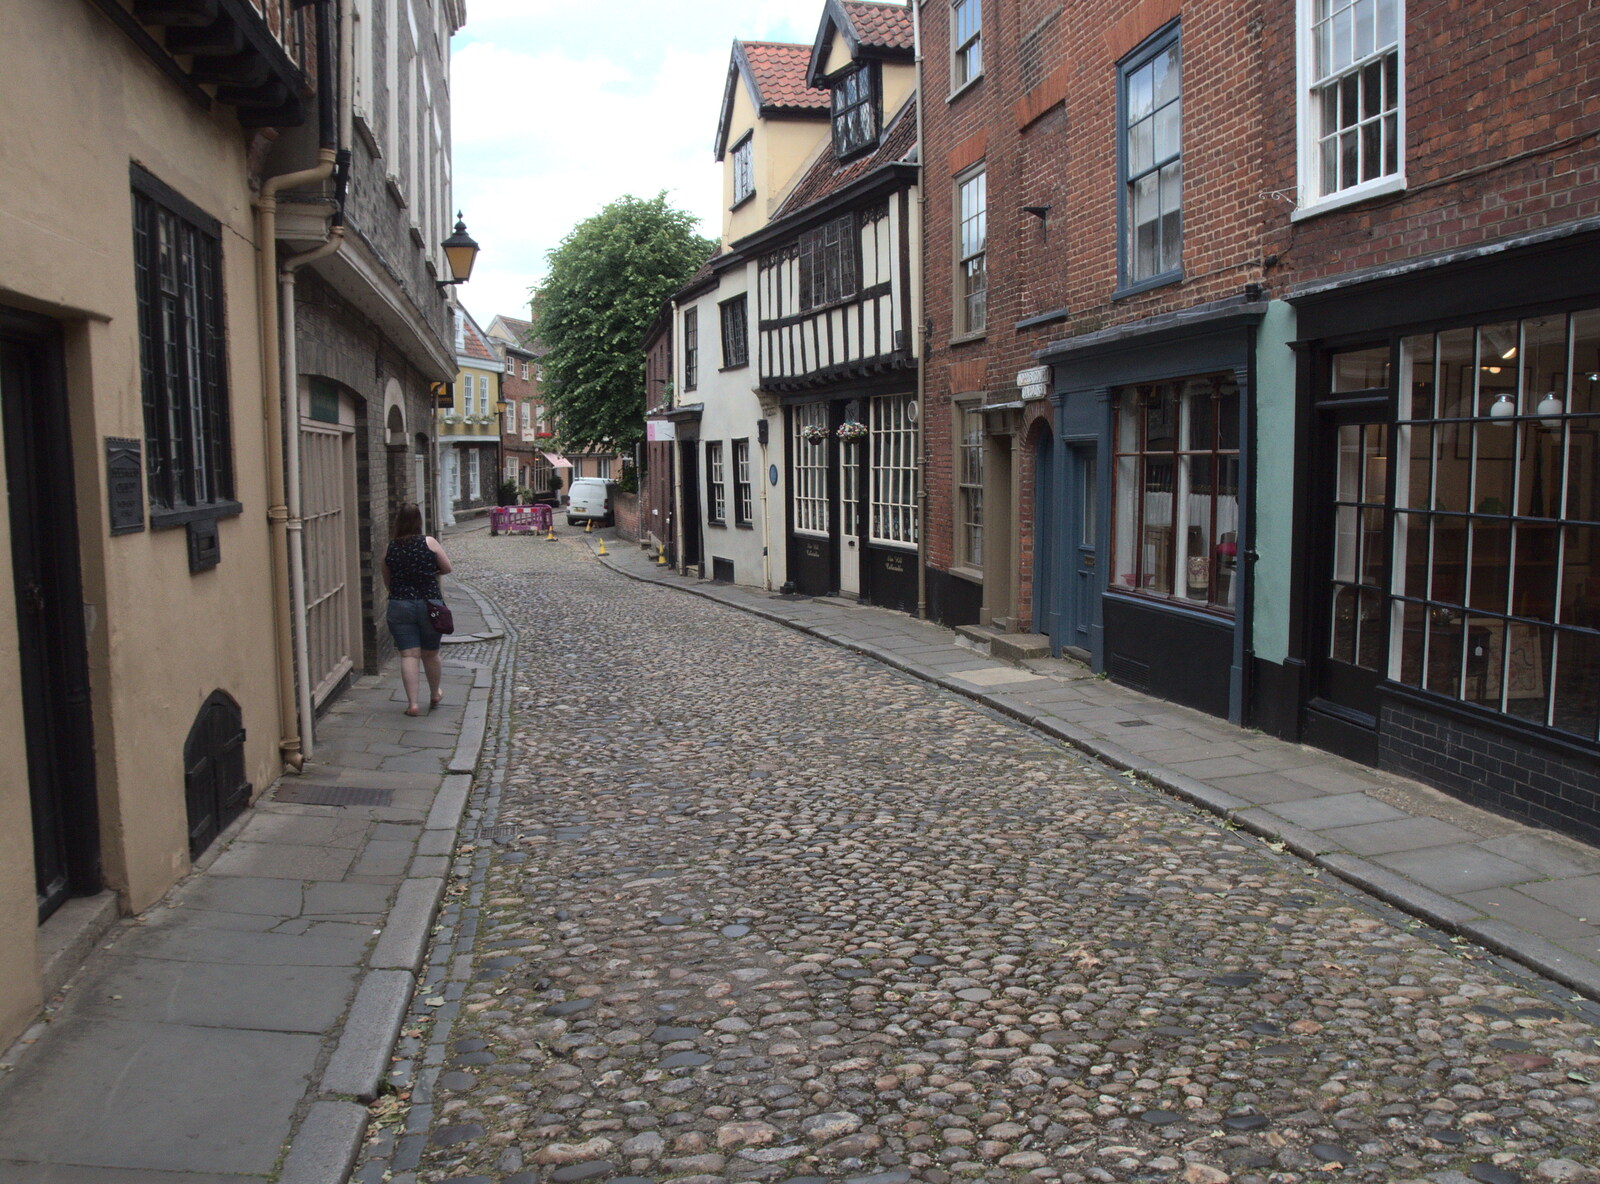 Fred's Flute Exam and Sean and Hannah Visit, Norwich and Brome, Suffolk - 18th June 2022: The cobbley Elm Hill